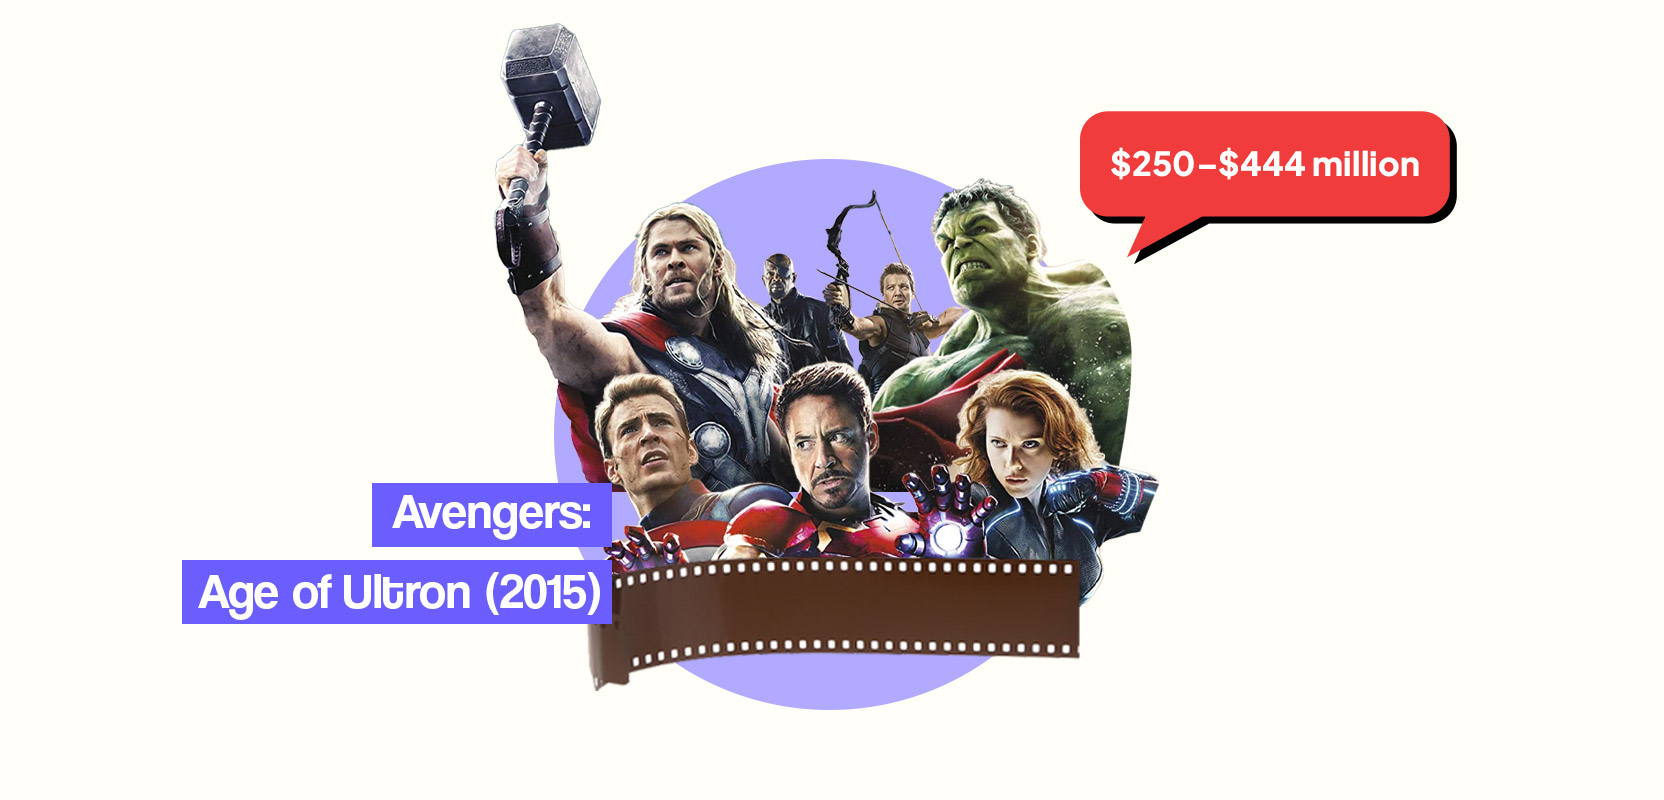 Avengers: Age of Ultron, with estimated budget